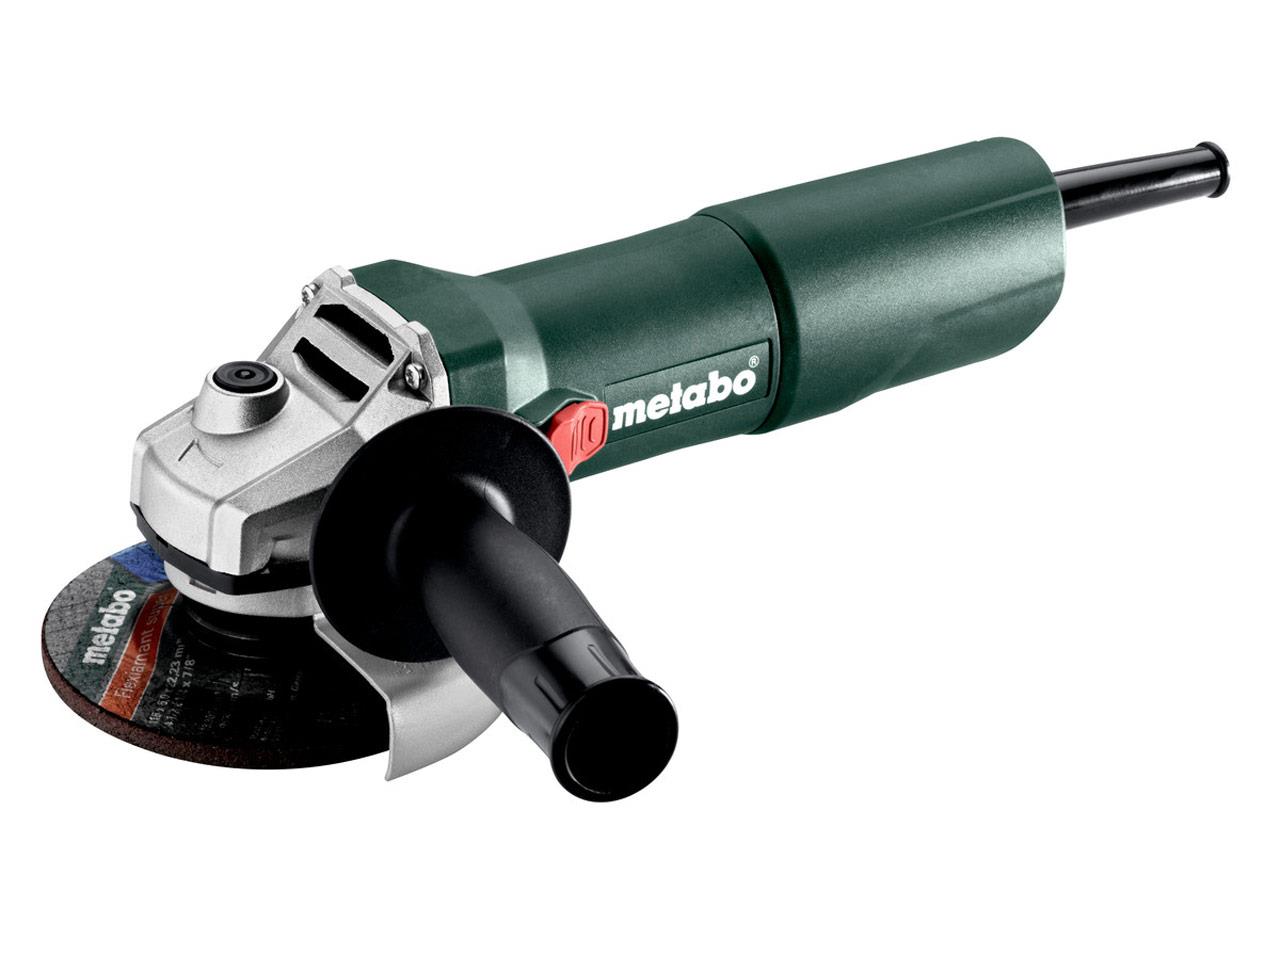 W750-115  Metabo W750-115/2 110v 700w 4.5in Angle Grinder with Restart Protection